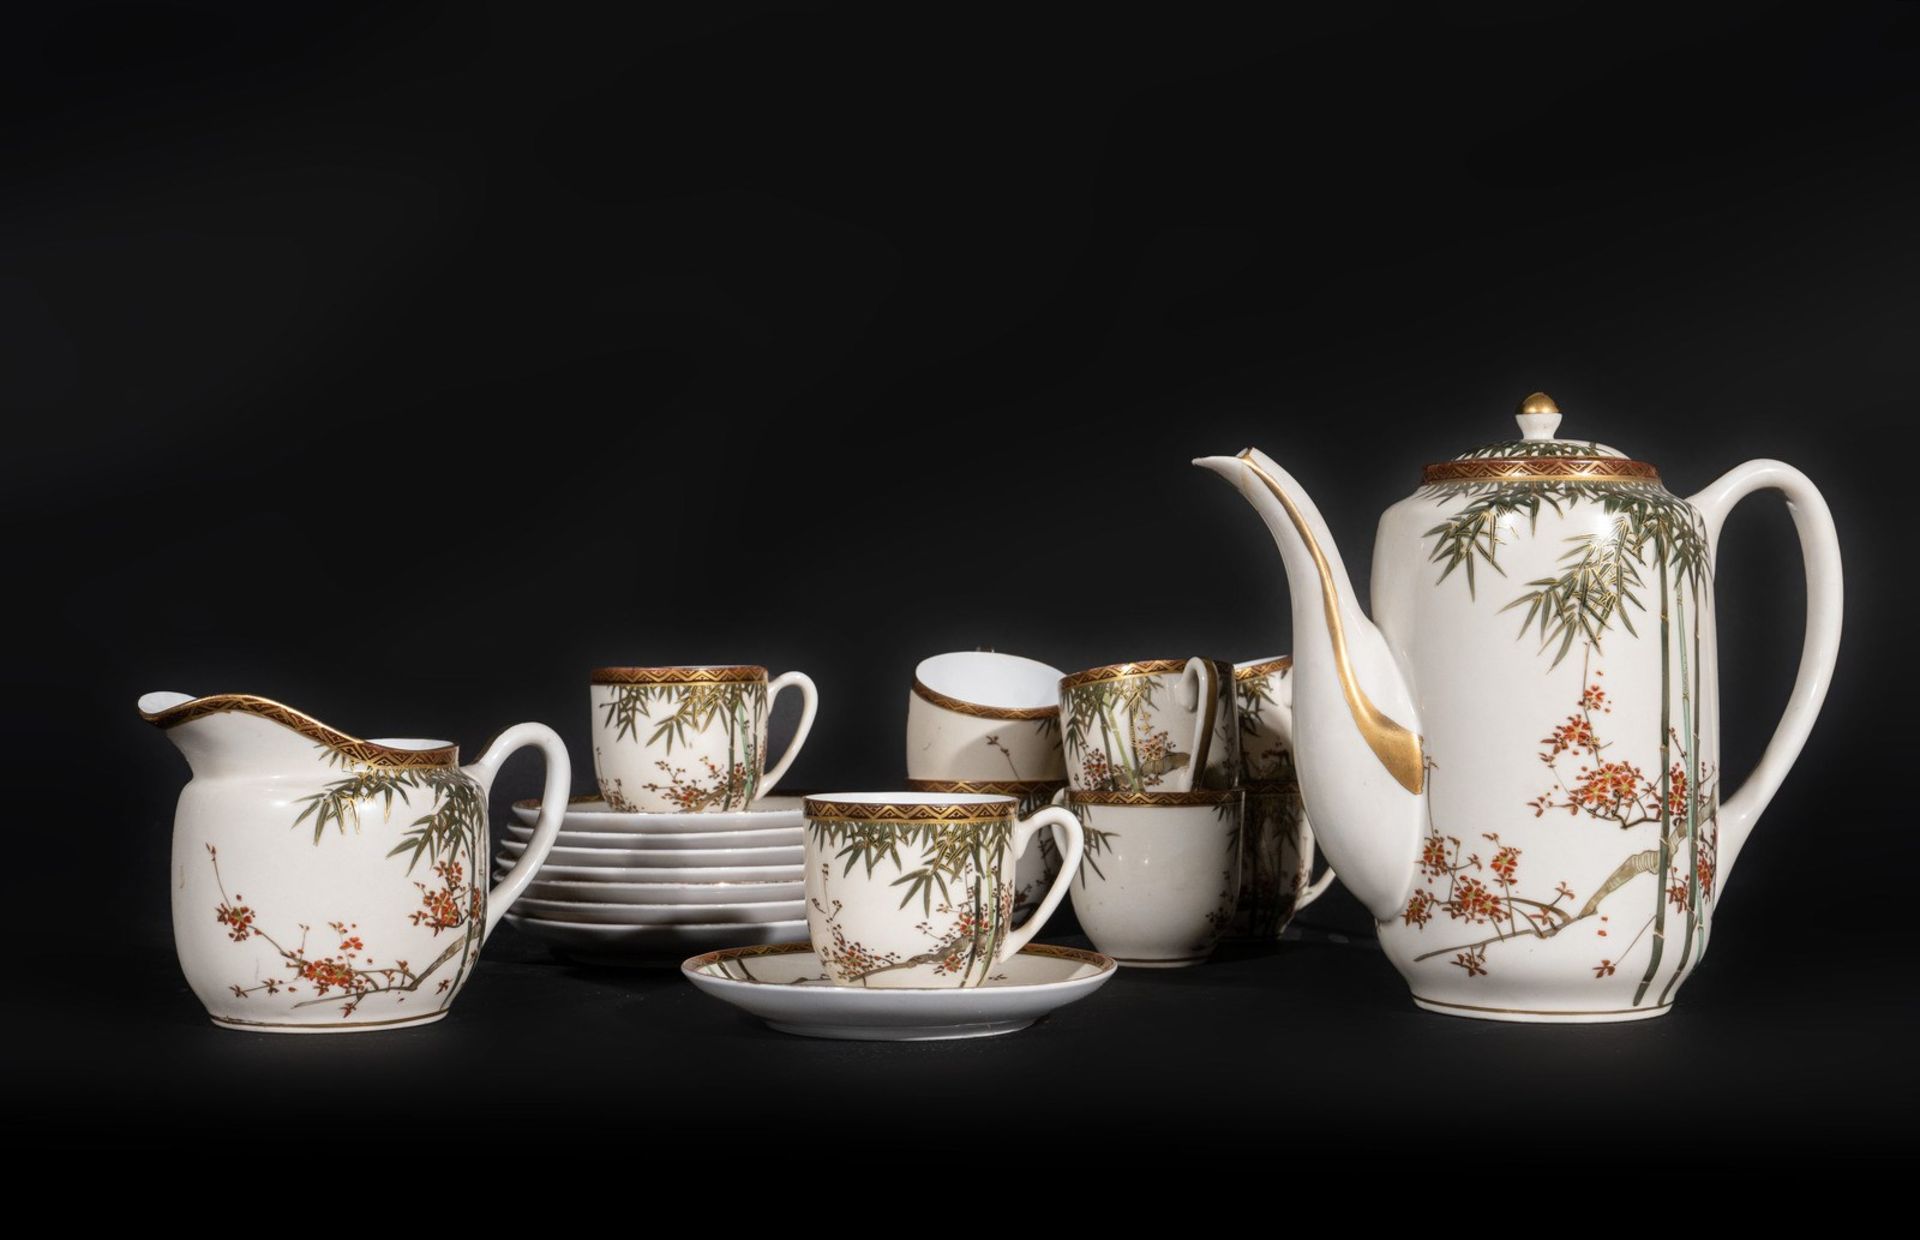 ARTE GIAPPONESE An eight cover white porcelain coffee serviceJapan, 19th century . - Image 2 of 6